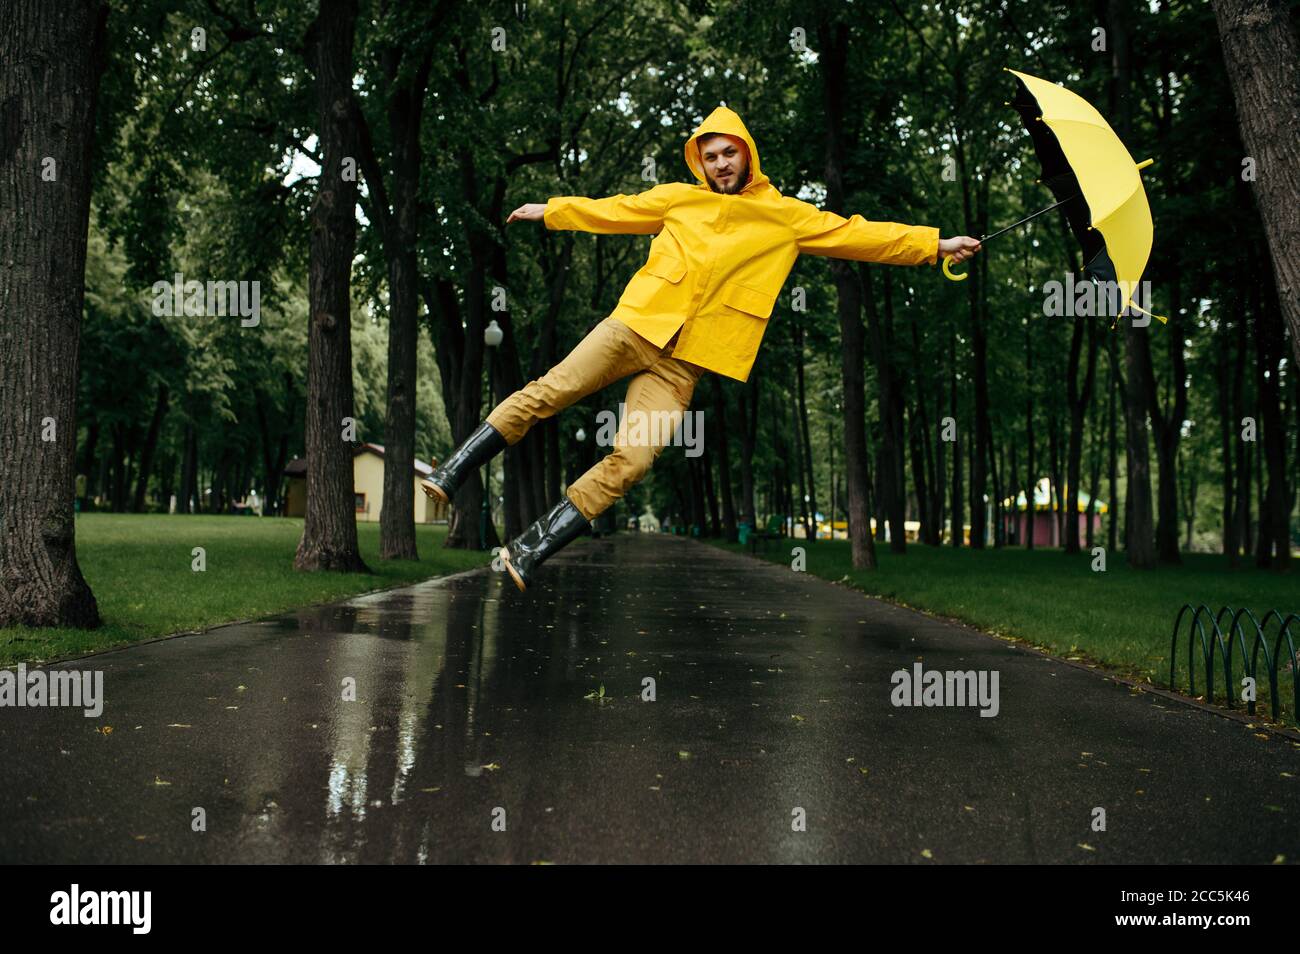 Man flying with umbrella in windy rainy day Stock Photo